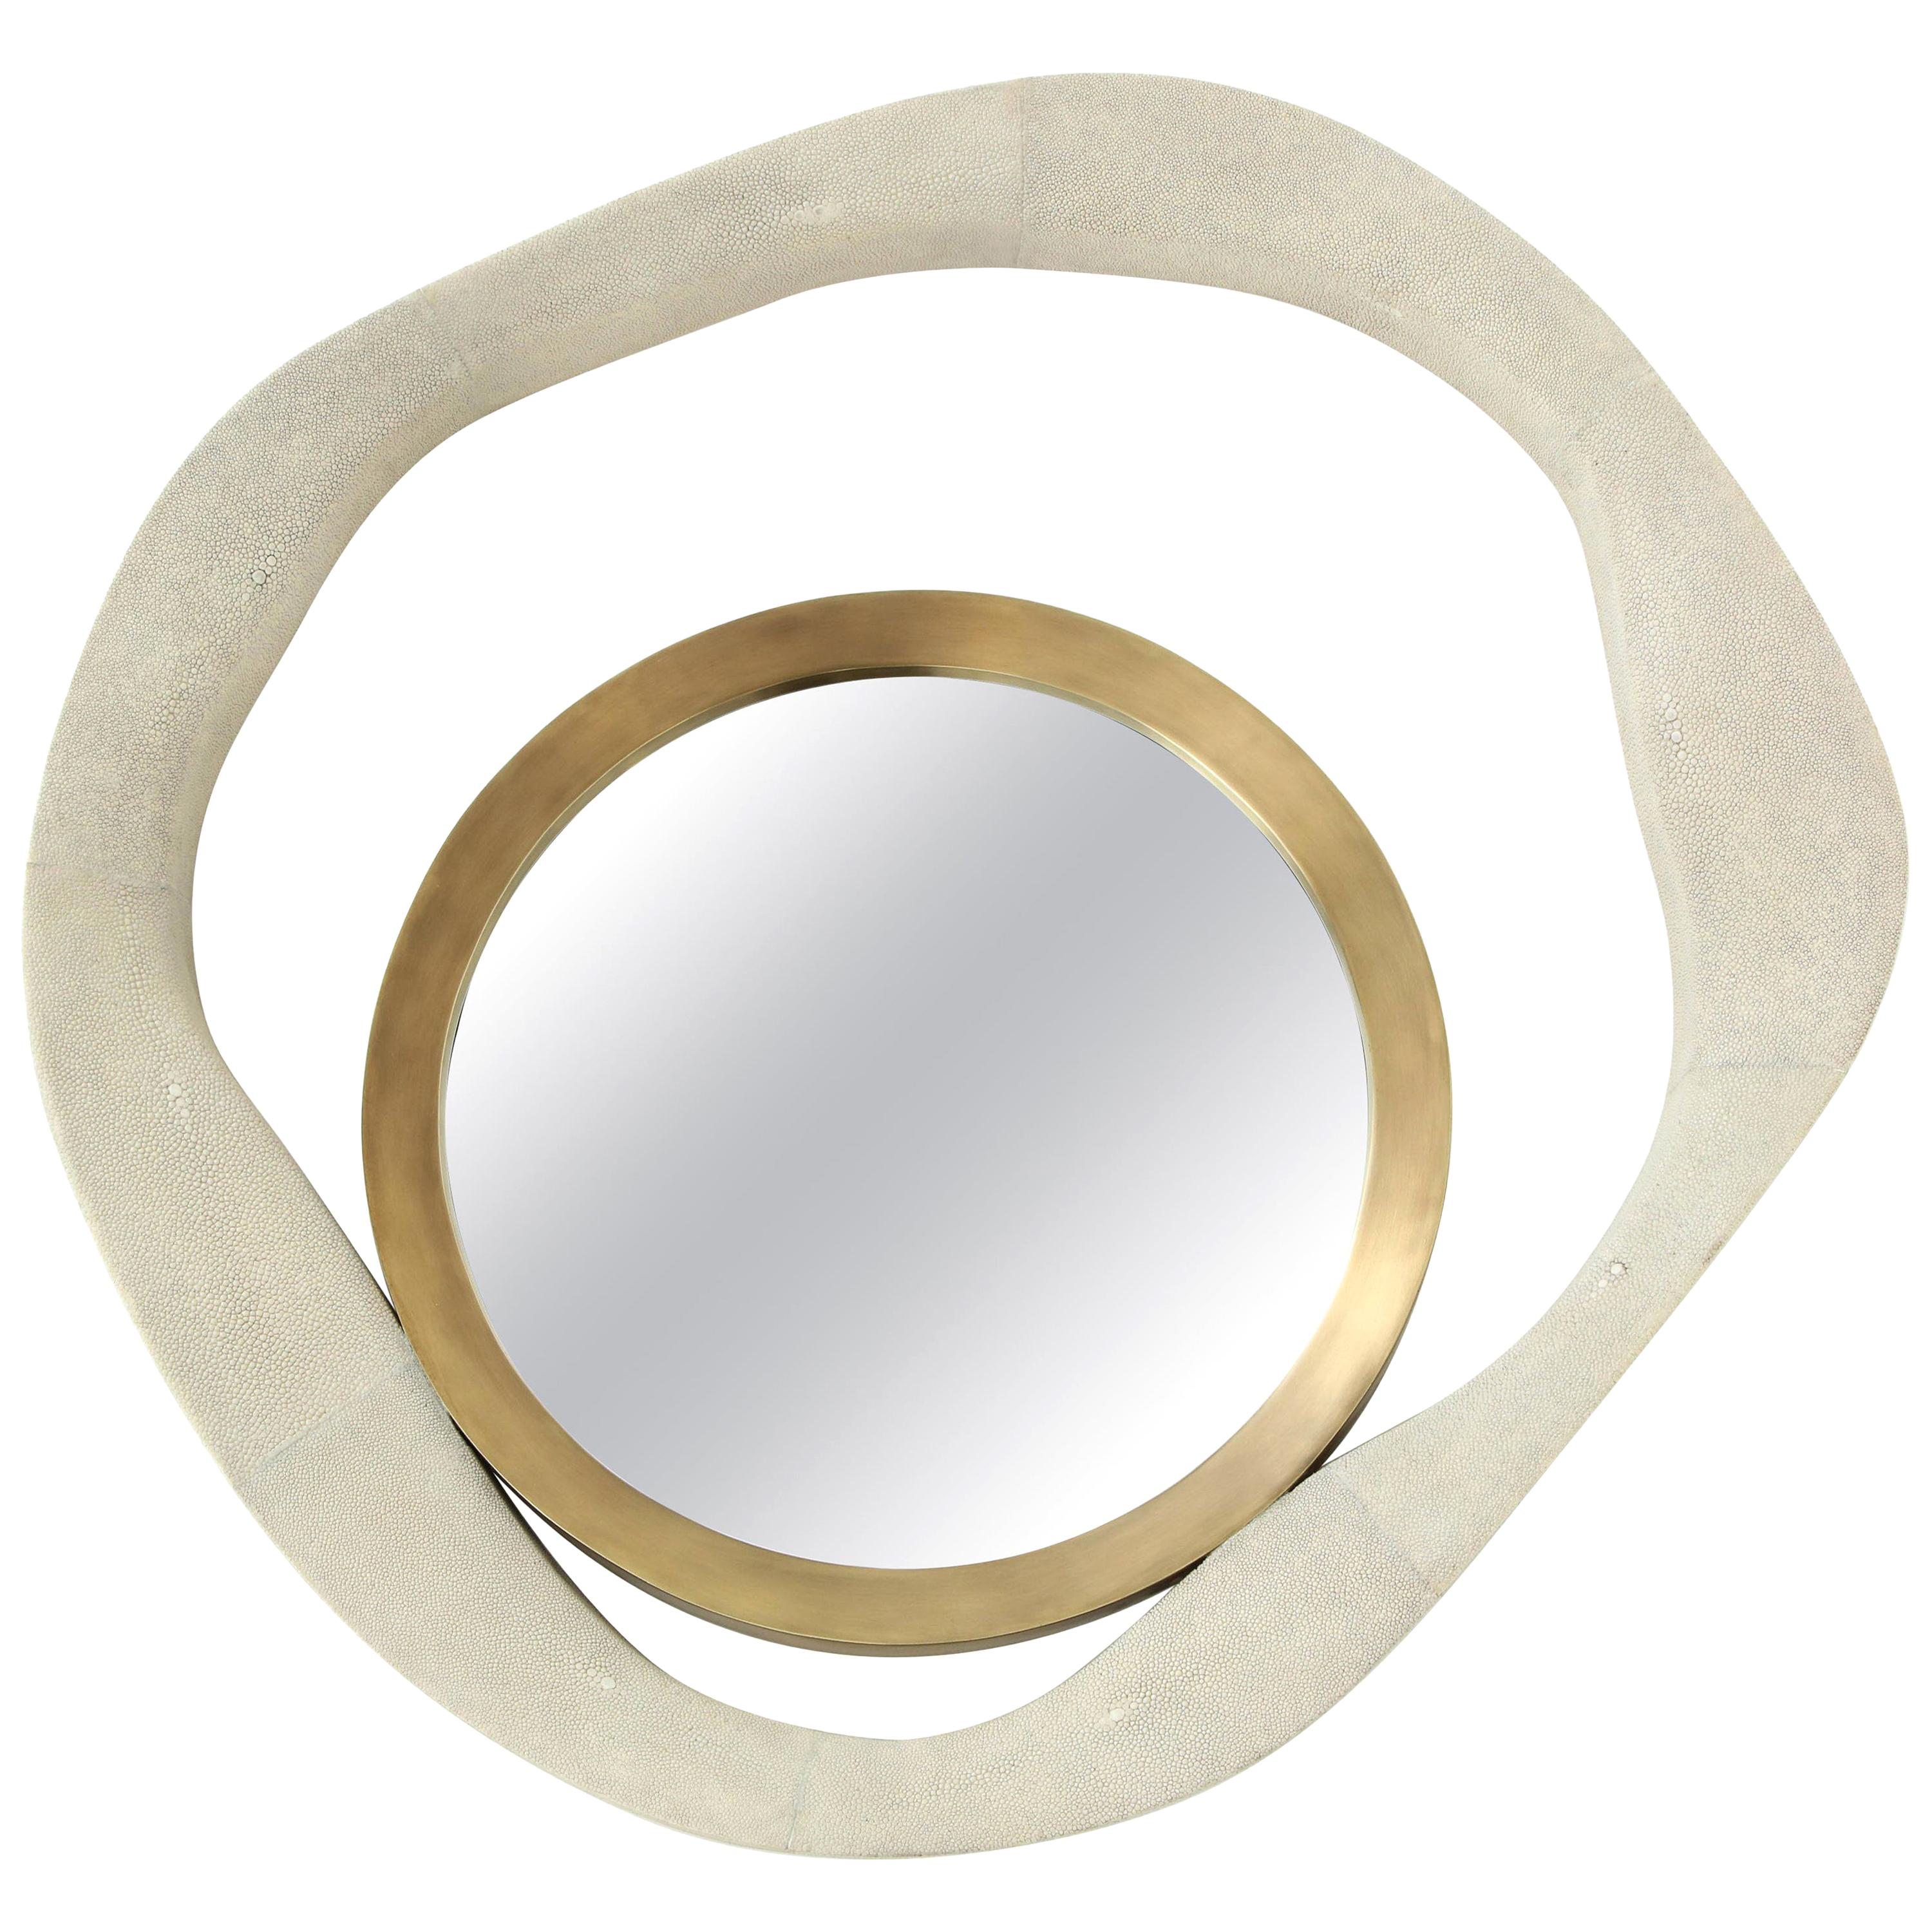 Shagreen Mirror with Brass Details, Cream Color Shagreen, Contemporary, Round